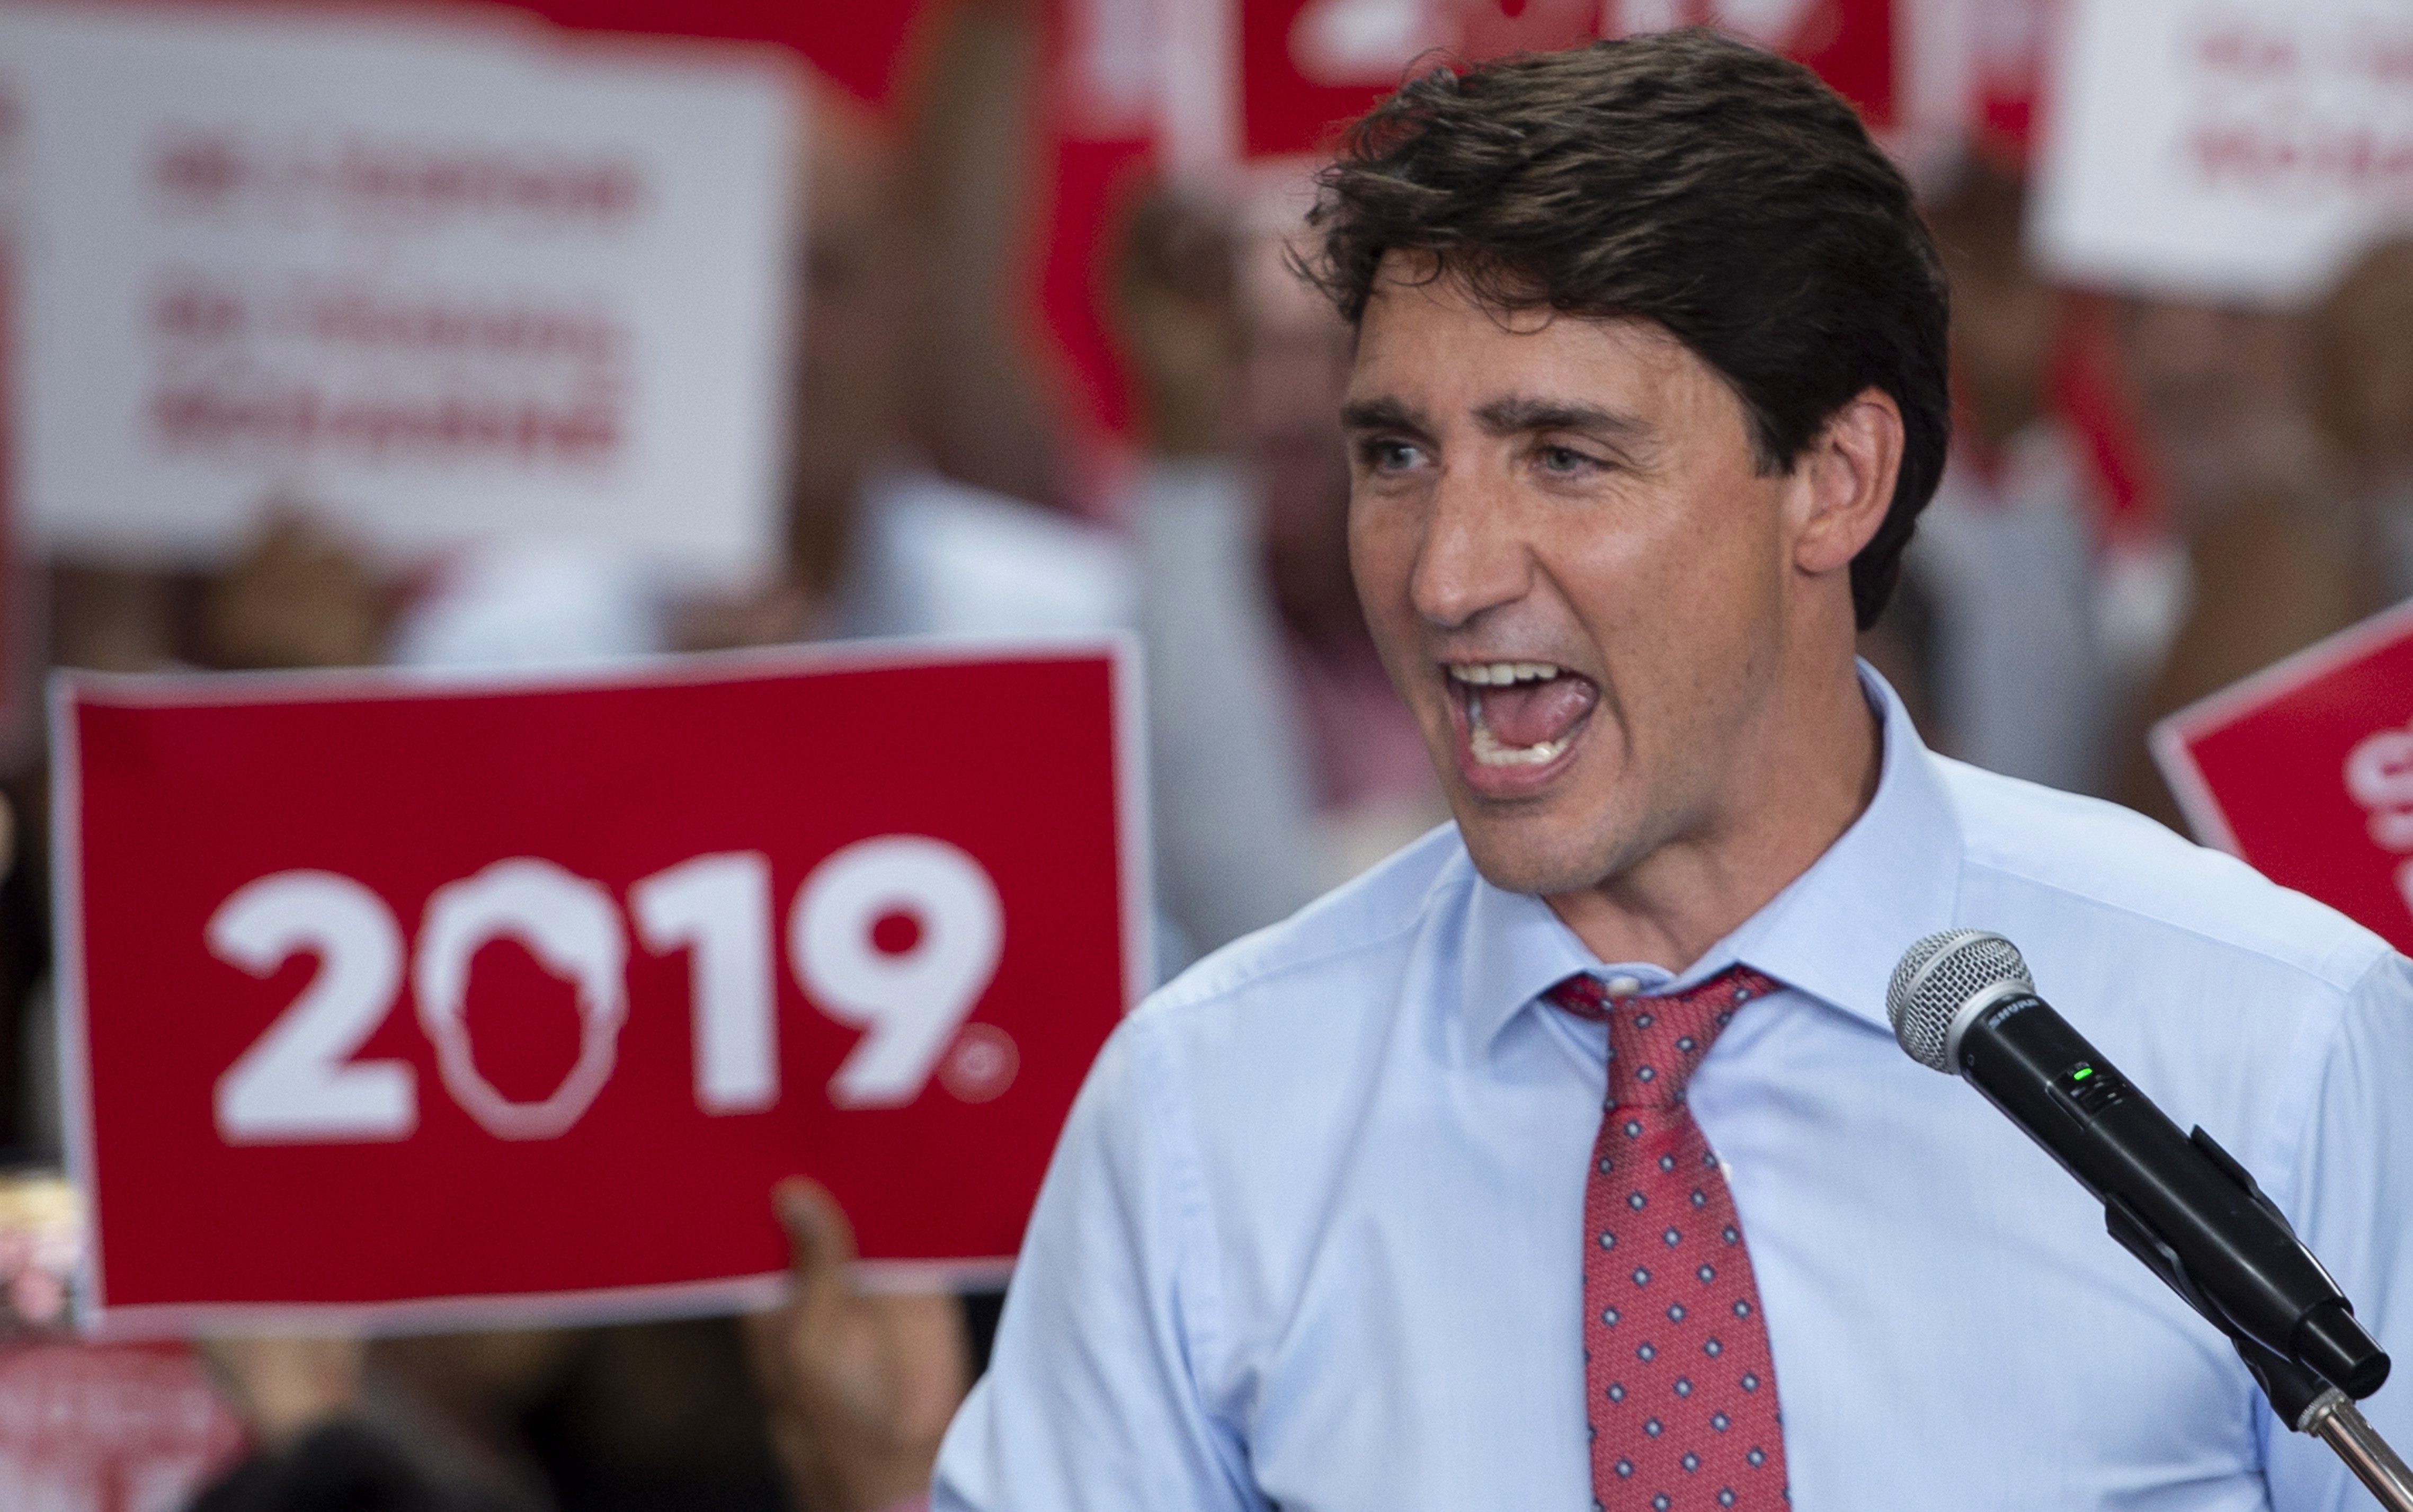 Justin Trudeau formally announces he'll run again in 2019 election